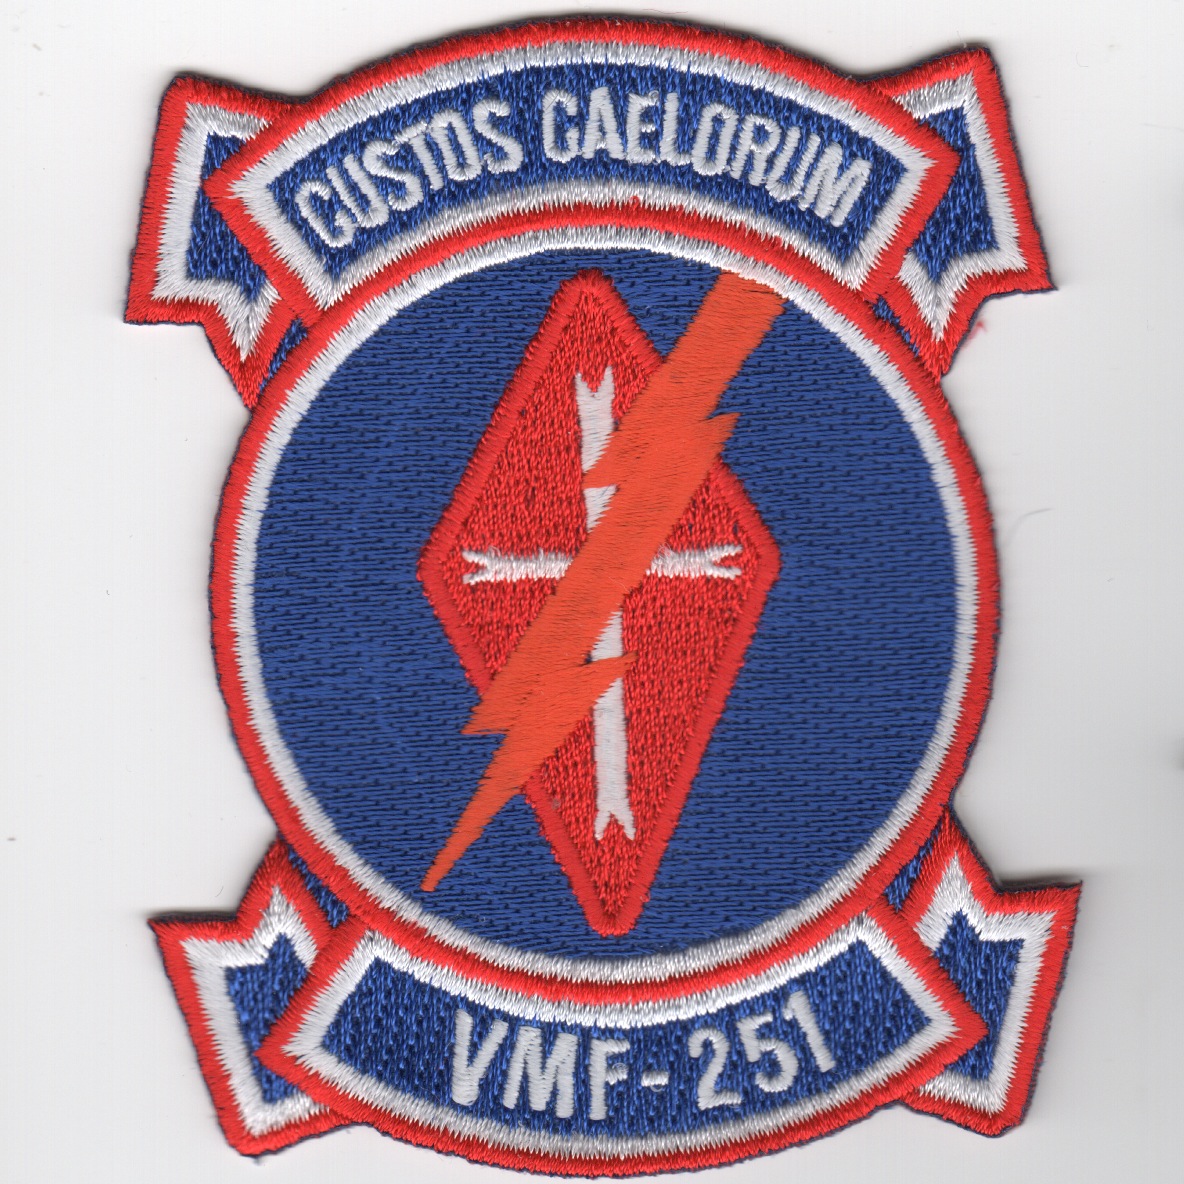 VMF-251 Squadron Patch